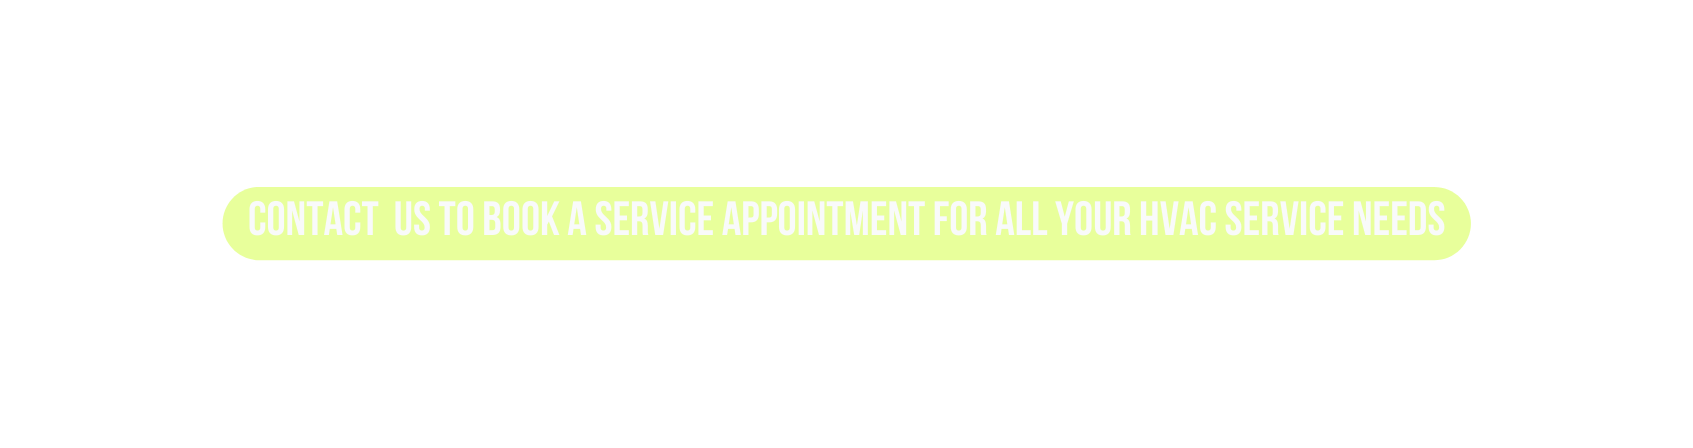 Contact us to book a service appointment for all your HVAC service needs